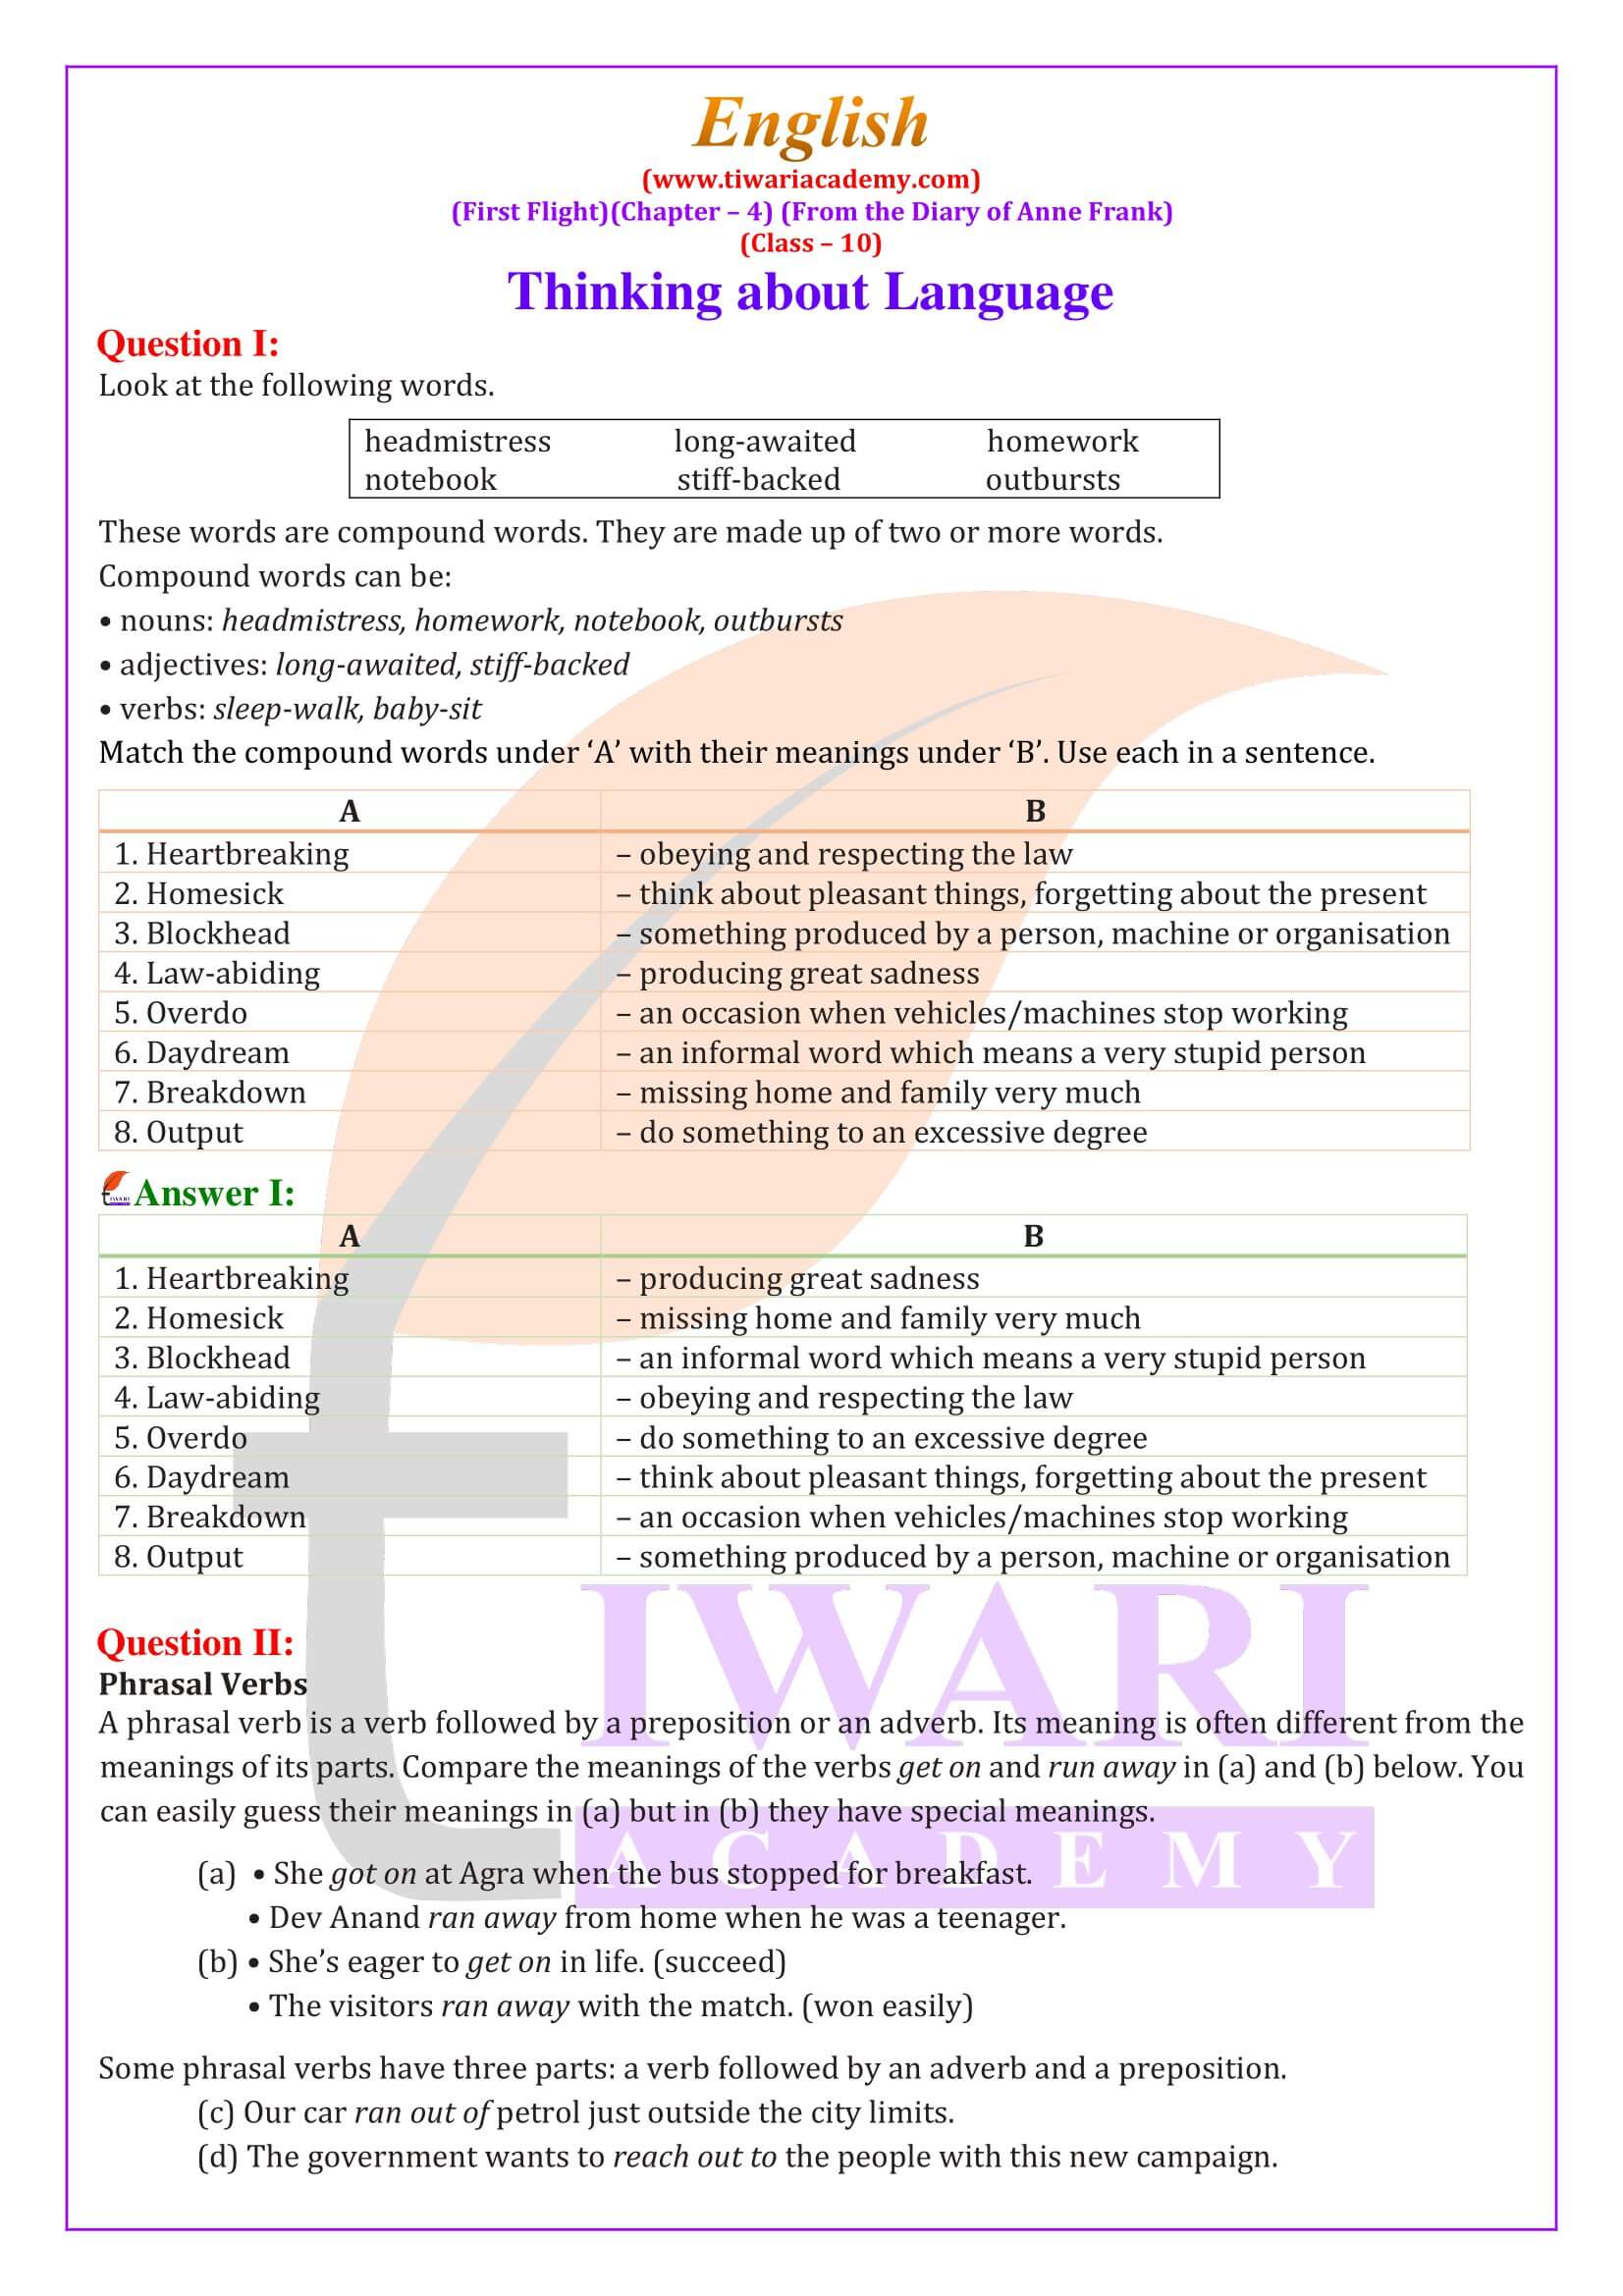 NCERT Solutions for Class 10 English First Flight Chapter 4